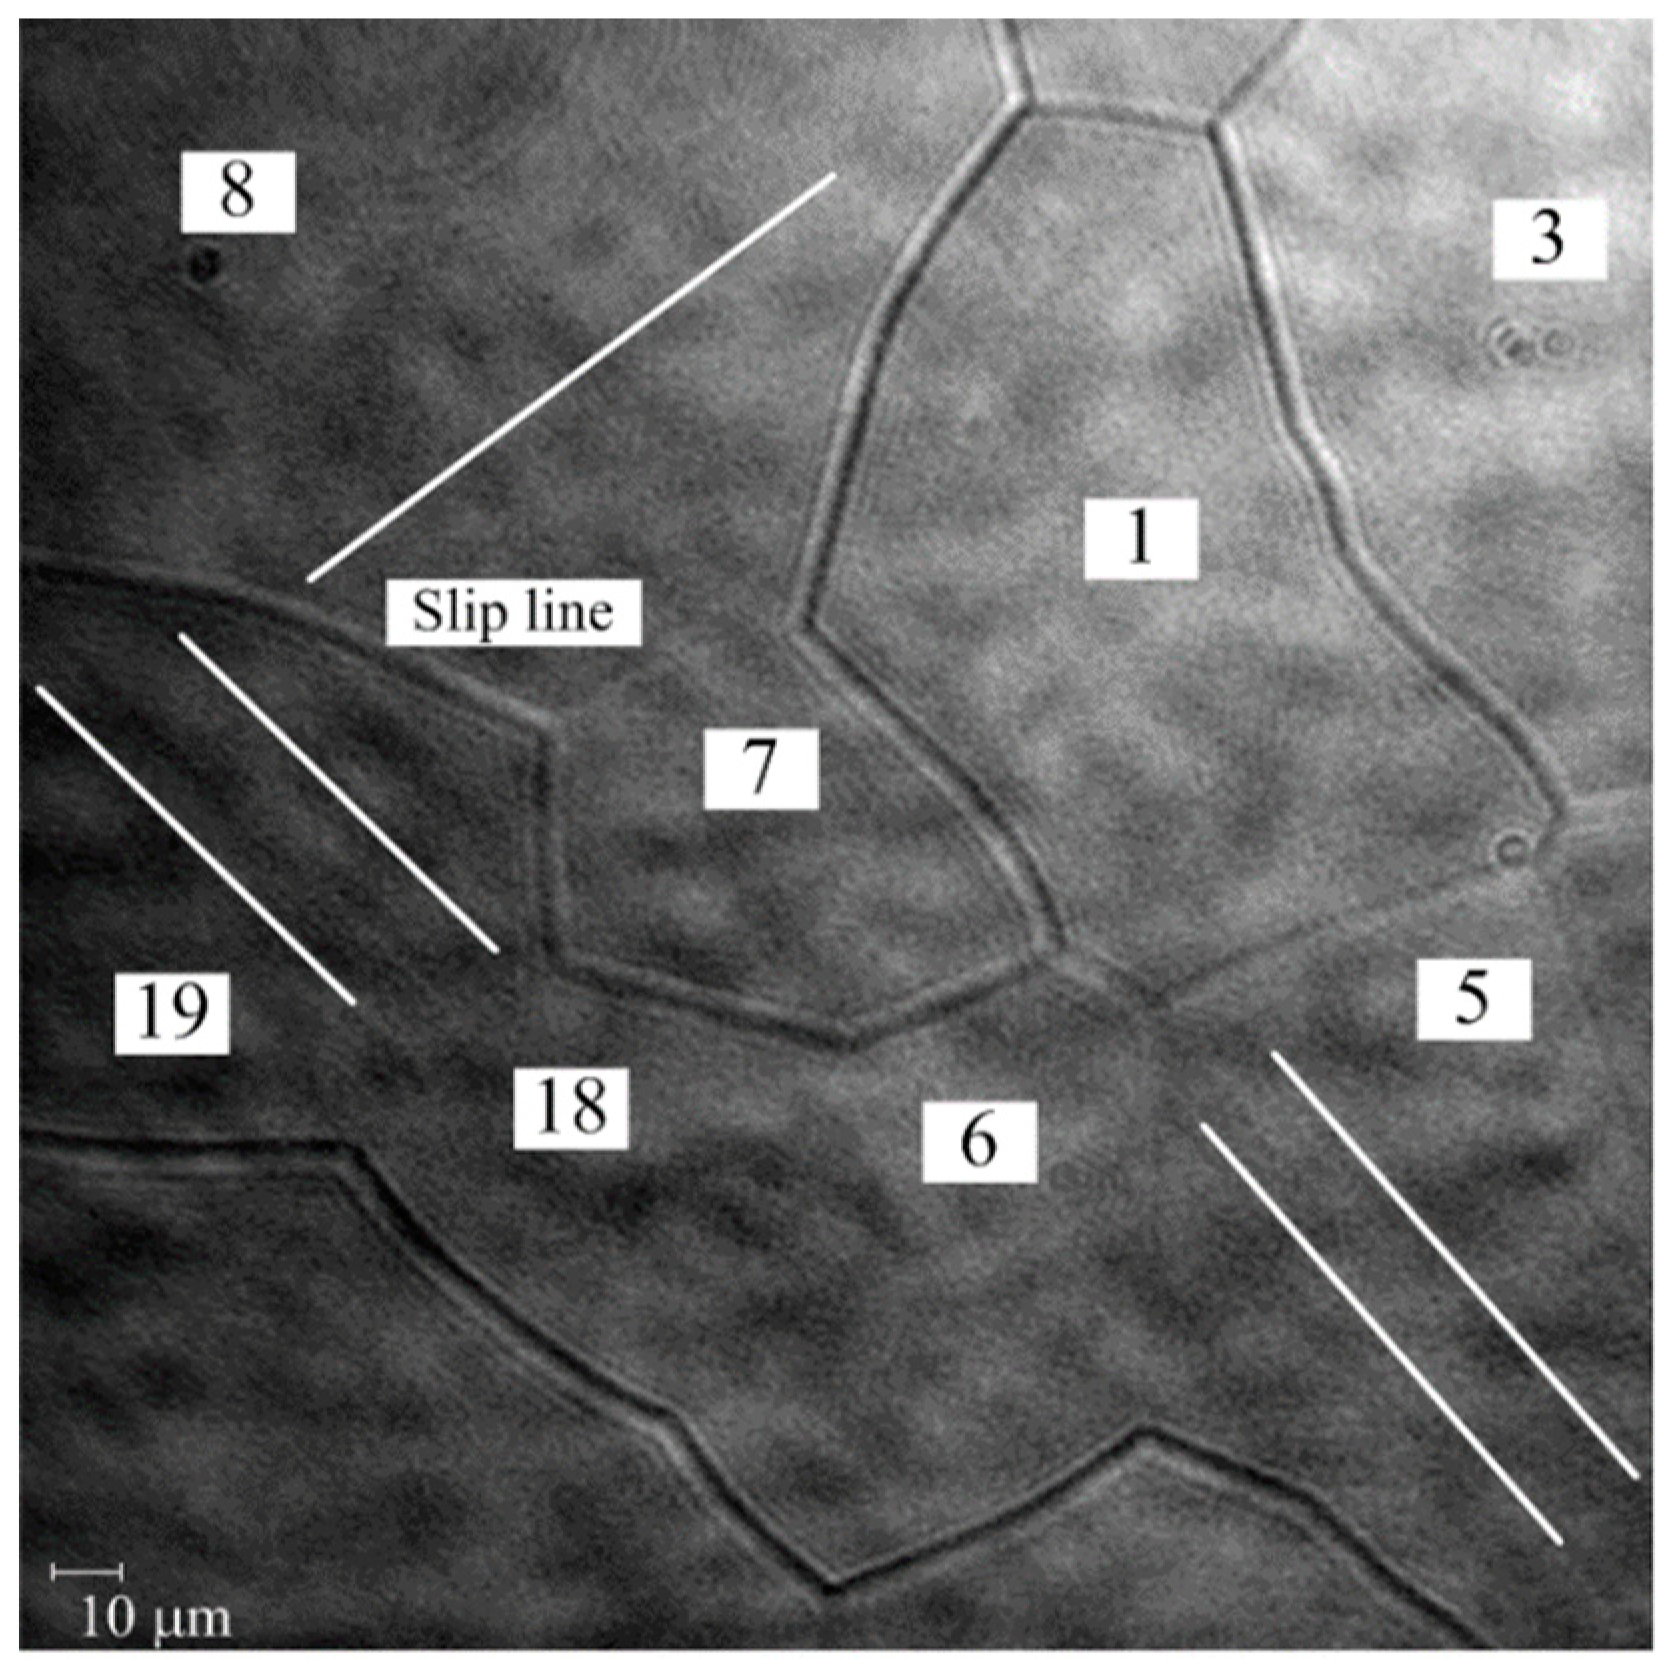 Applied Sciences | Free Full-Text | Microscopic Elastic and Plastic  Inhomogeneous Deformations and Height Changes on the Surface of a  Polycrystalline Pure-Titanium Plate Specimen under Cyclic Tension | HTML